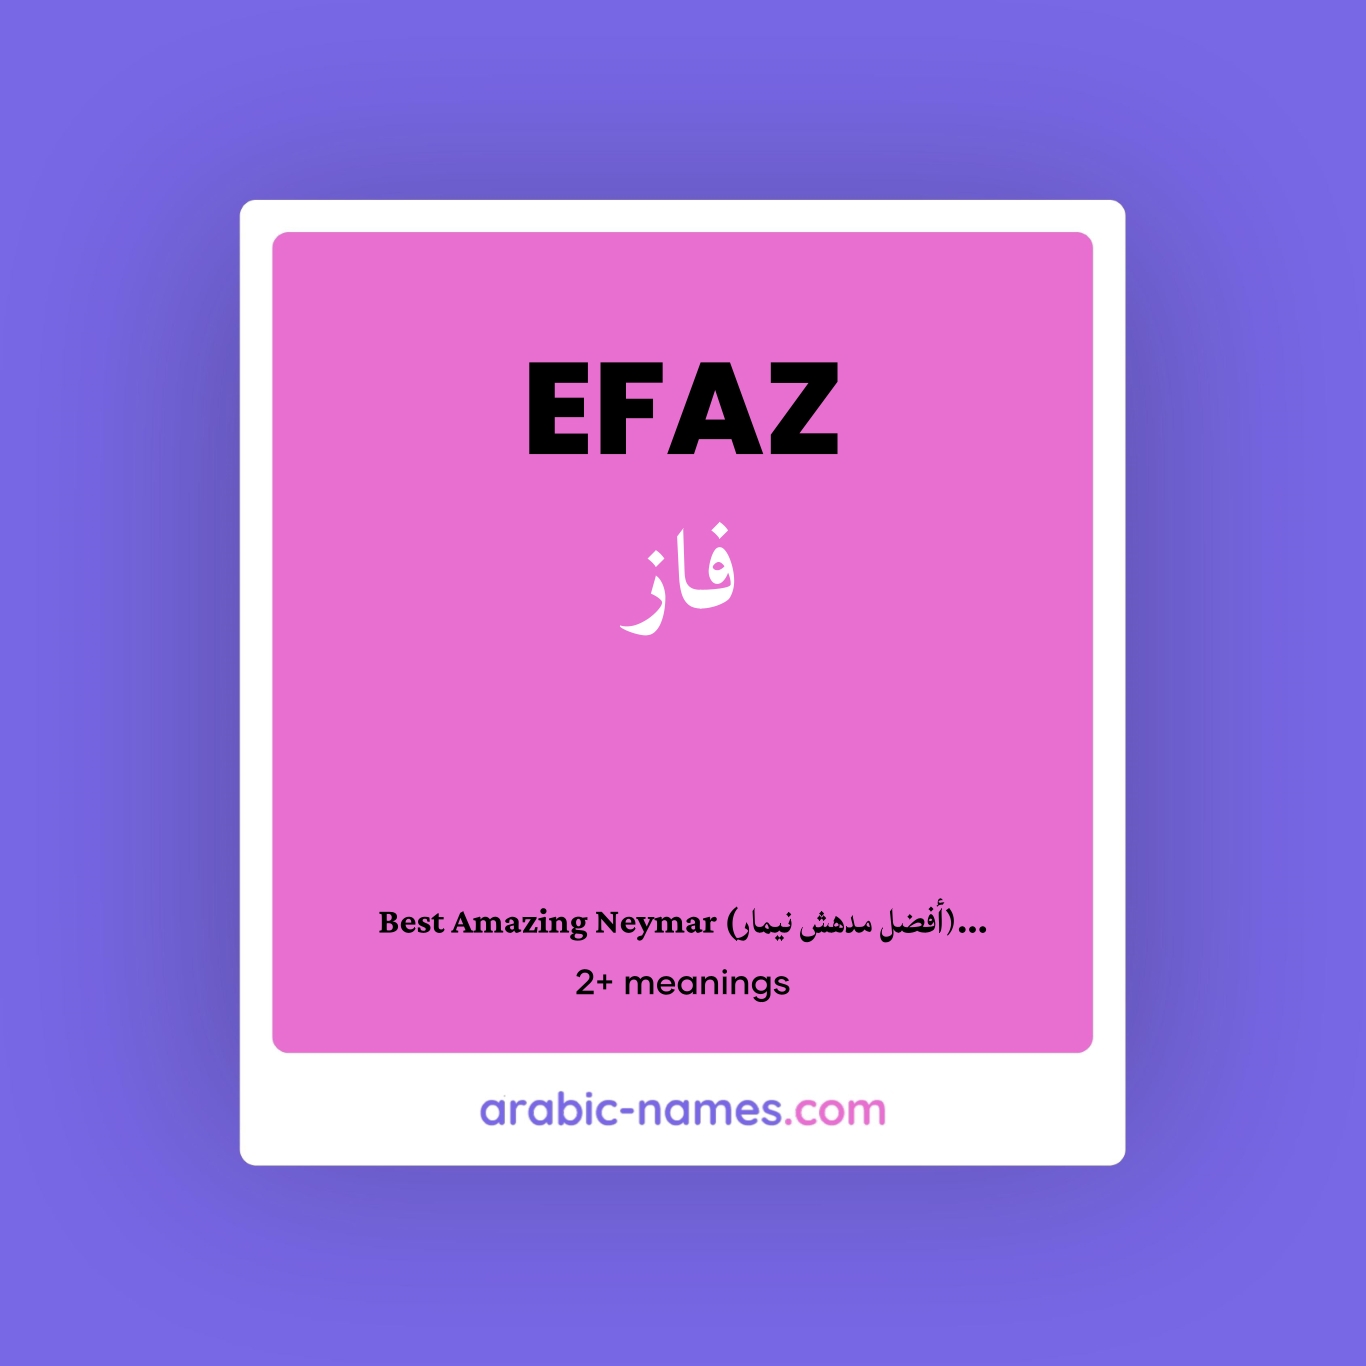 What does EFAZ stand for?